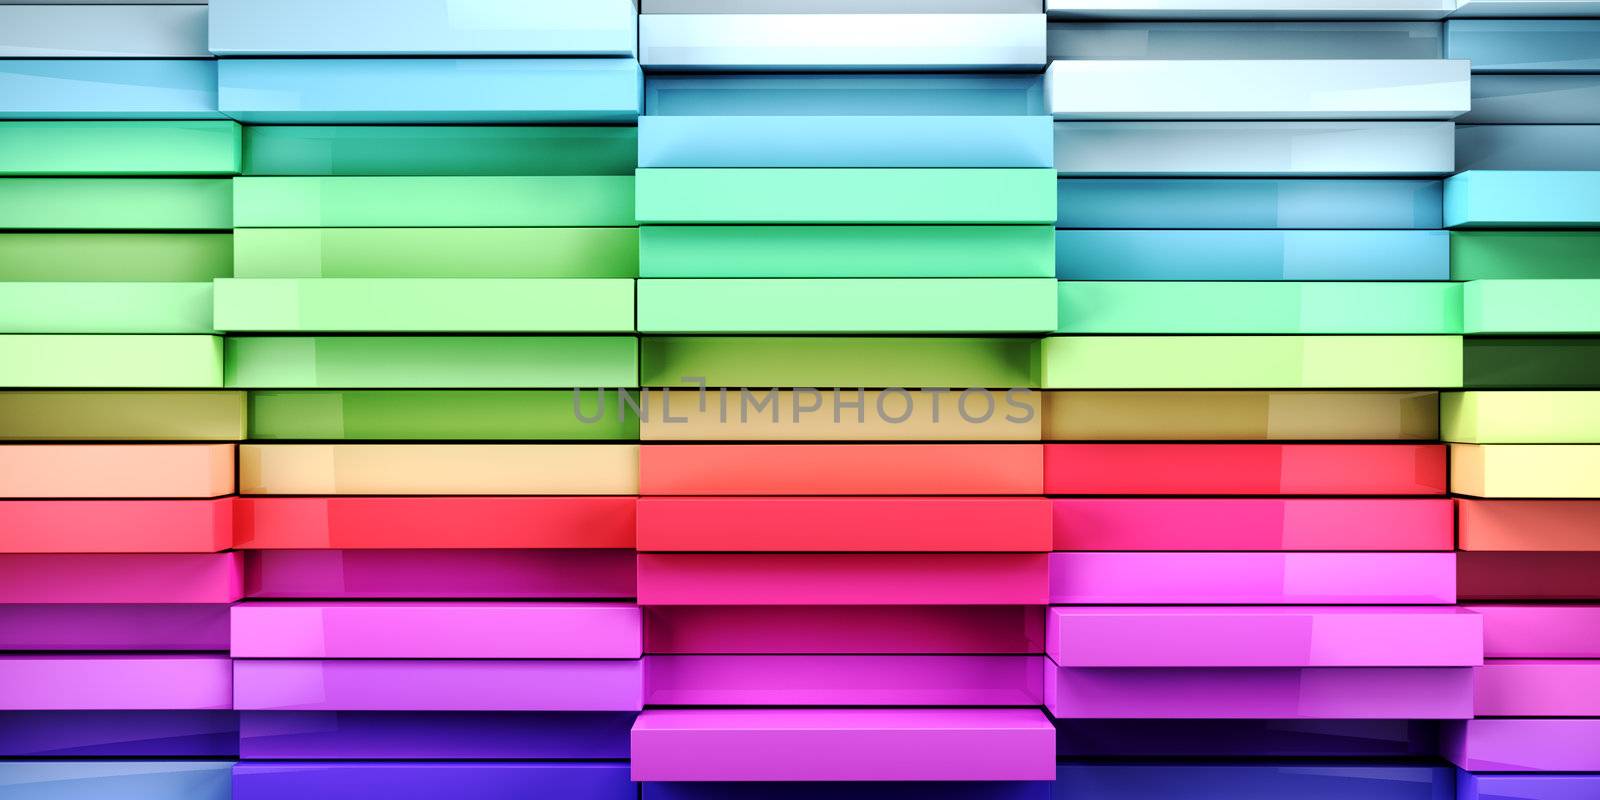 Coloful abstract tiles cubes background